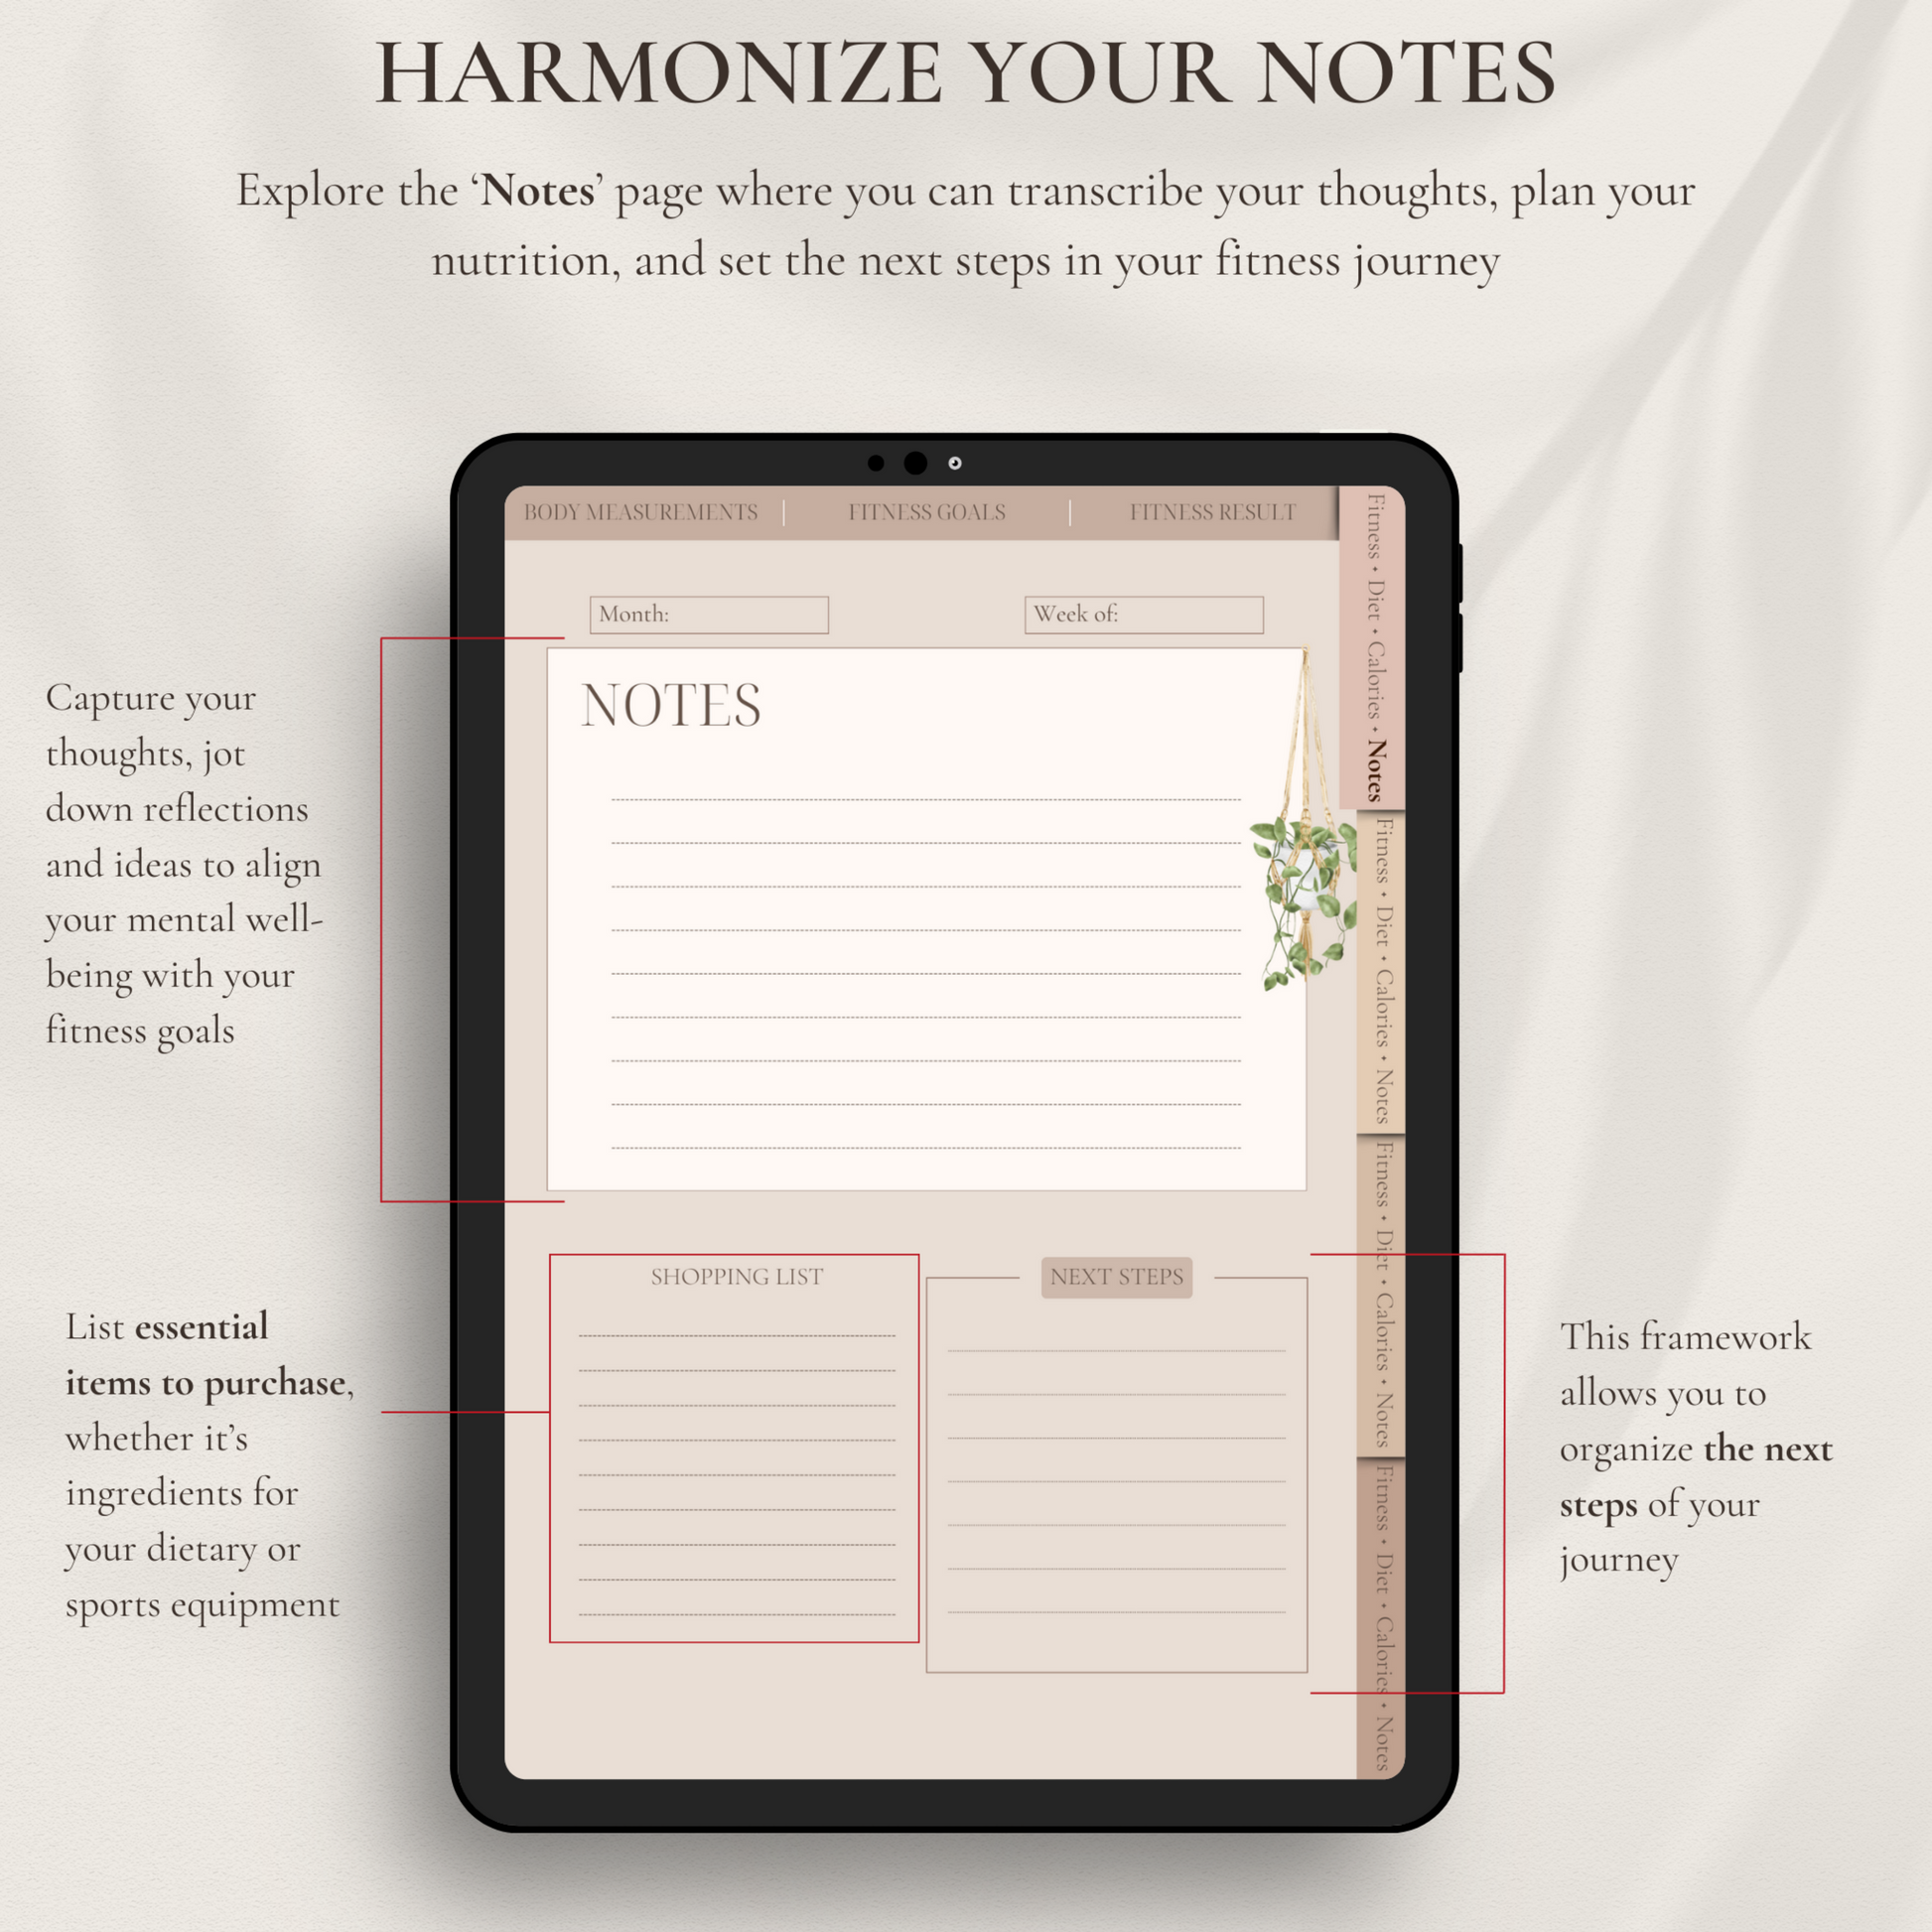 Explore the 'Notes' page where you can transcribe your thoughts, plan your nutrition, and set the next steps in your fitness journey